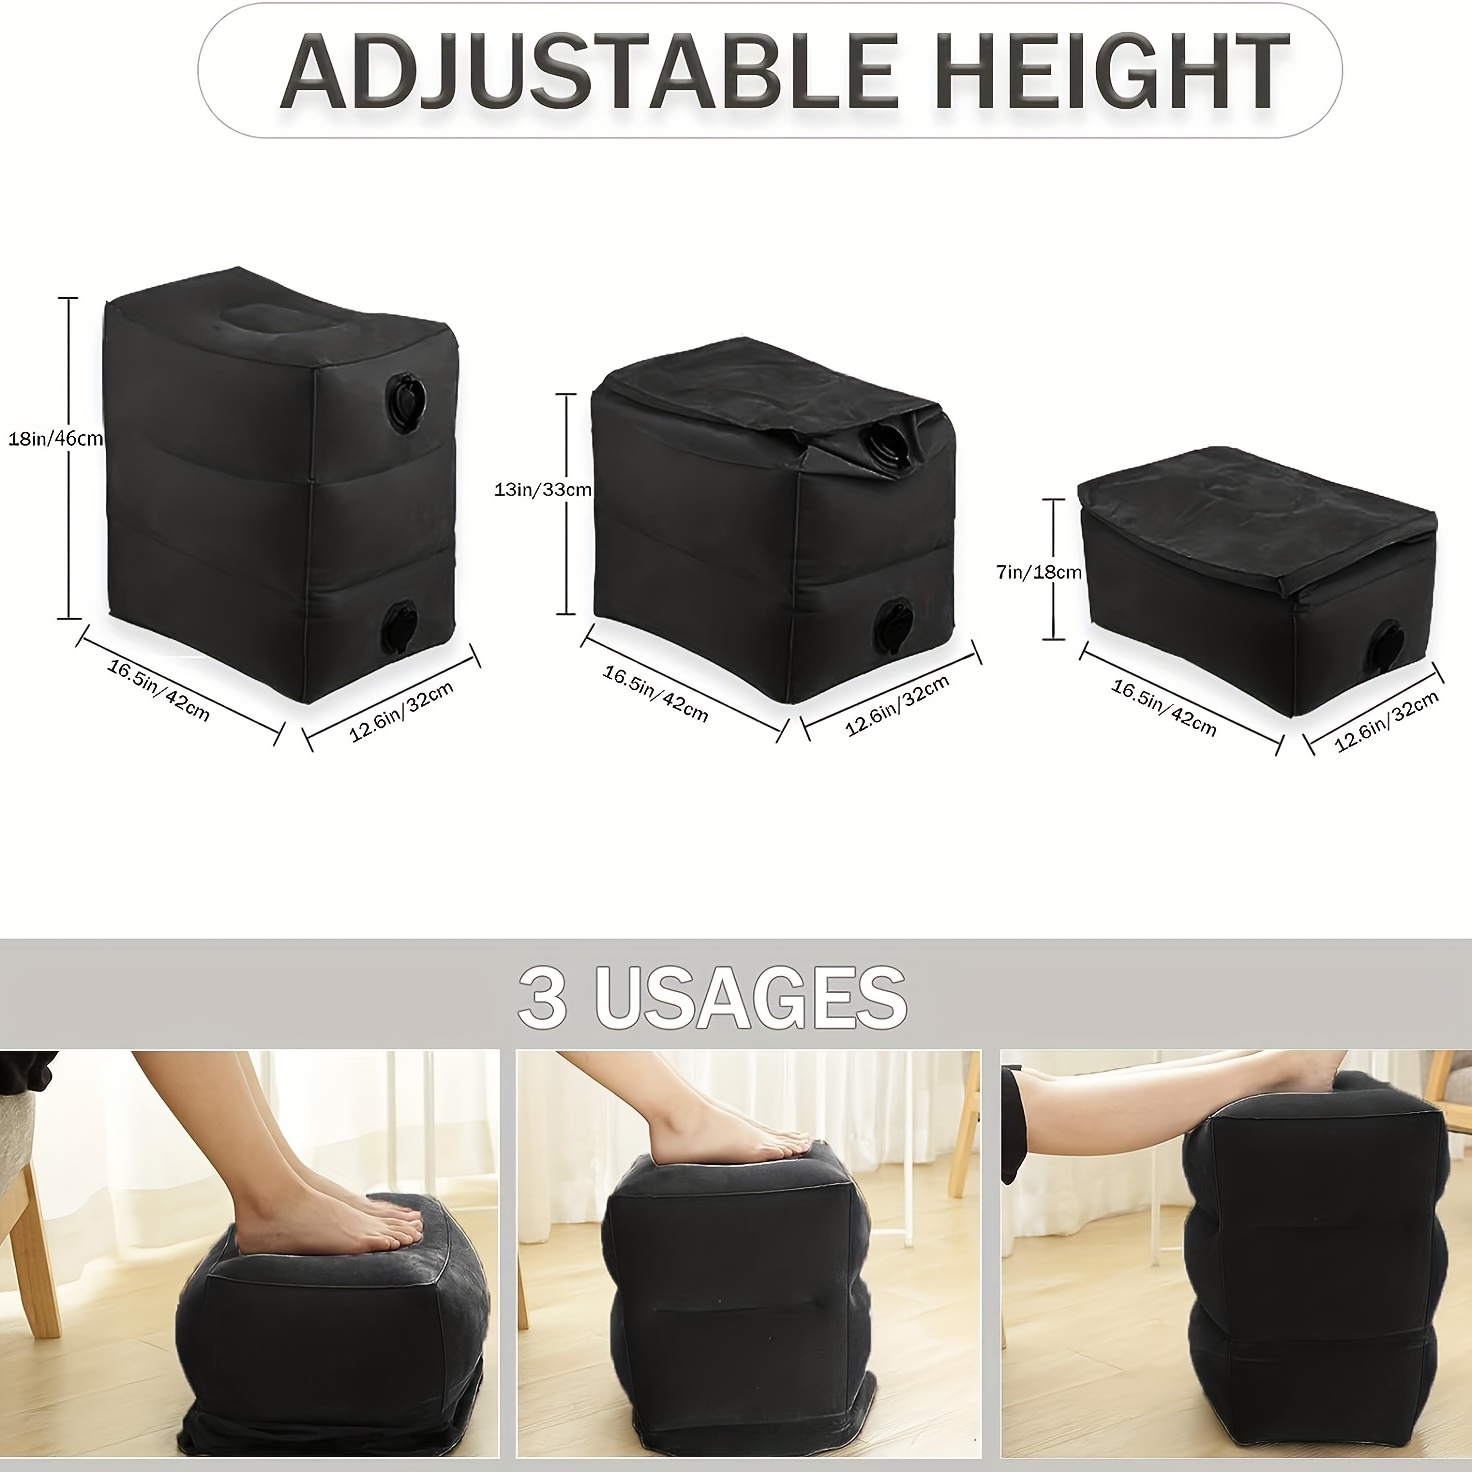 Desk Foot Rest Adjustable Height Double Layer Foot Rest For Under